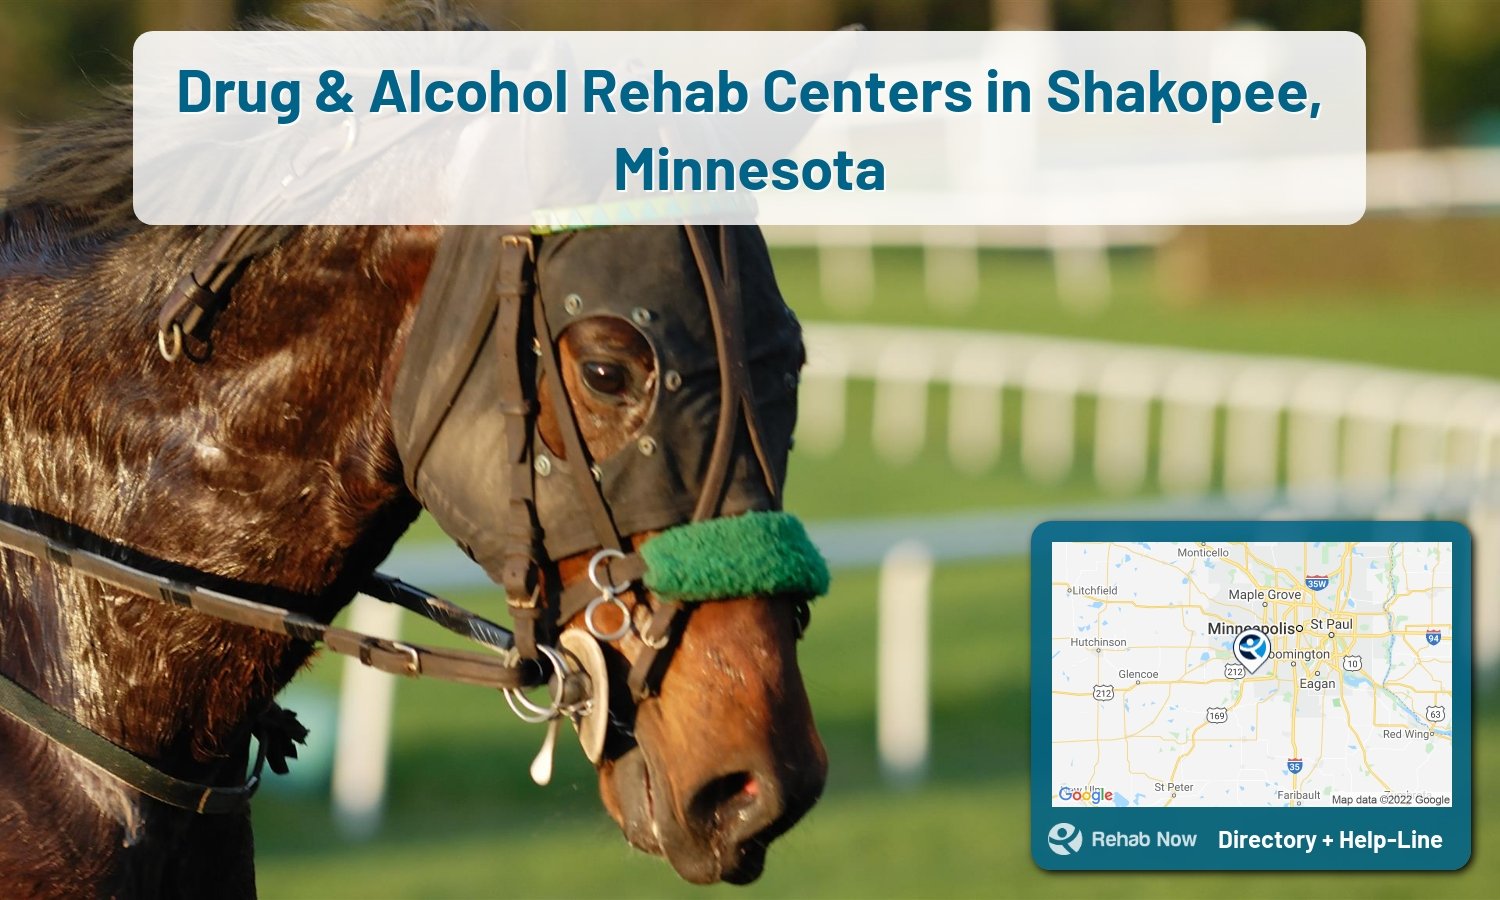 Drug rehab and alcohol treatment services nearby Shakopee, MN. Need help choosing a treatment program? Call our free hotline!